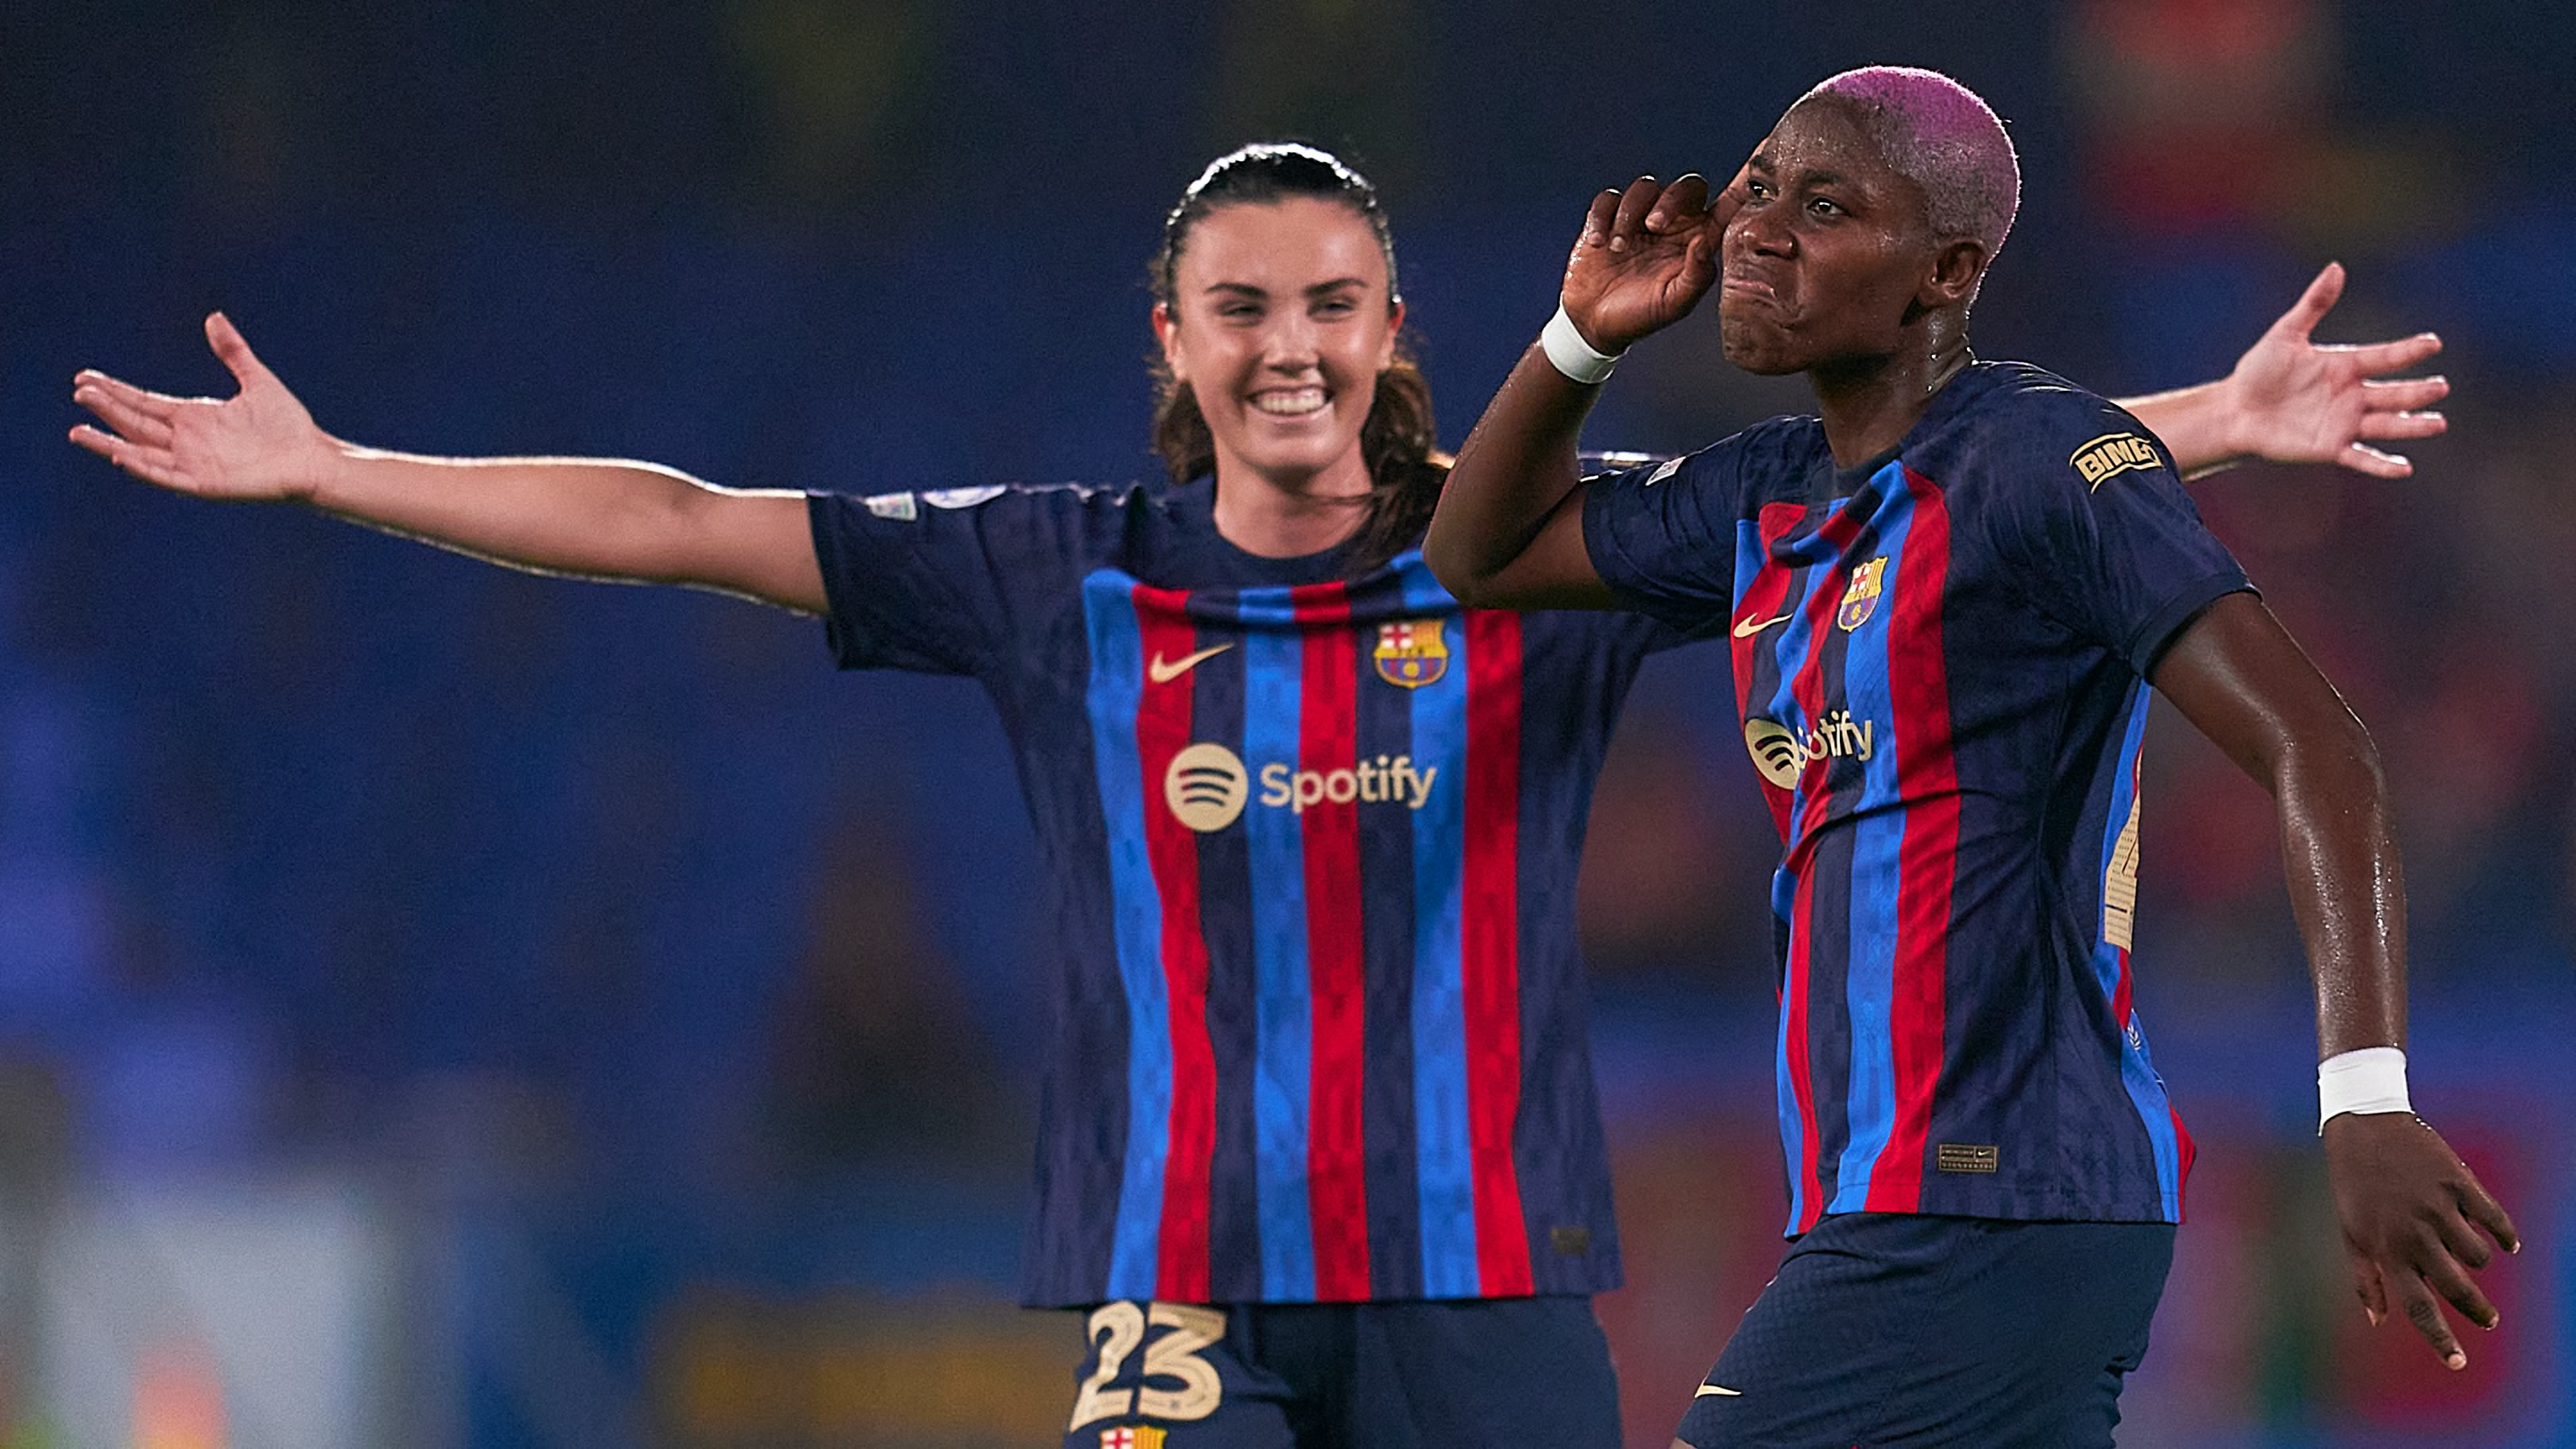 UWCL matchday 1 awards: Shock of the week, player of the week, goal of the week & more